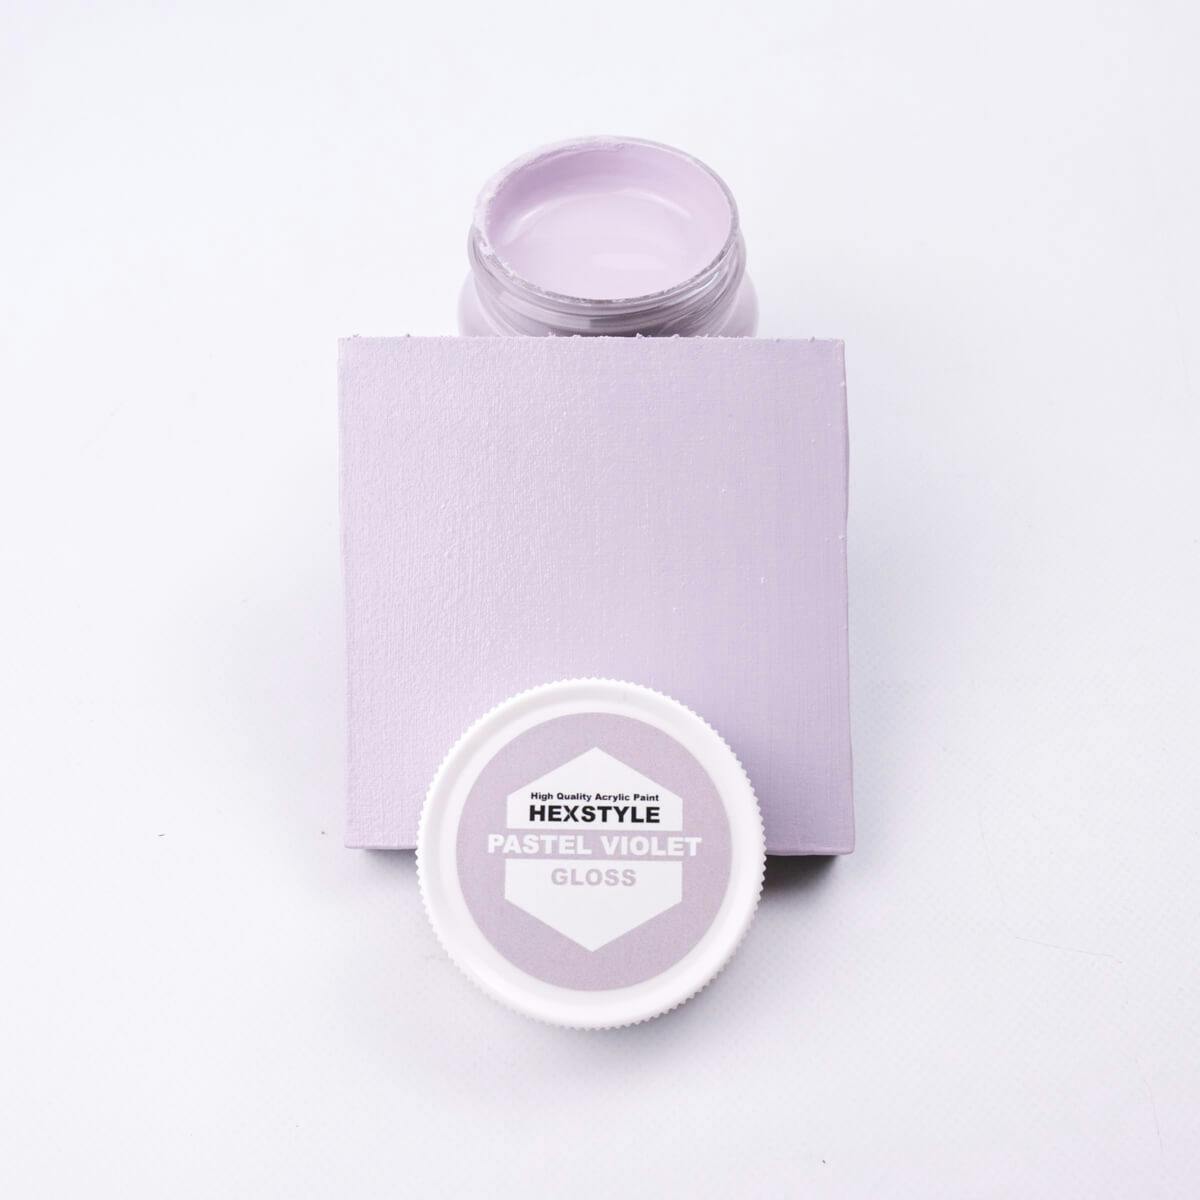 Hexstyle gloss pastel violet colour swatch